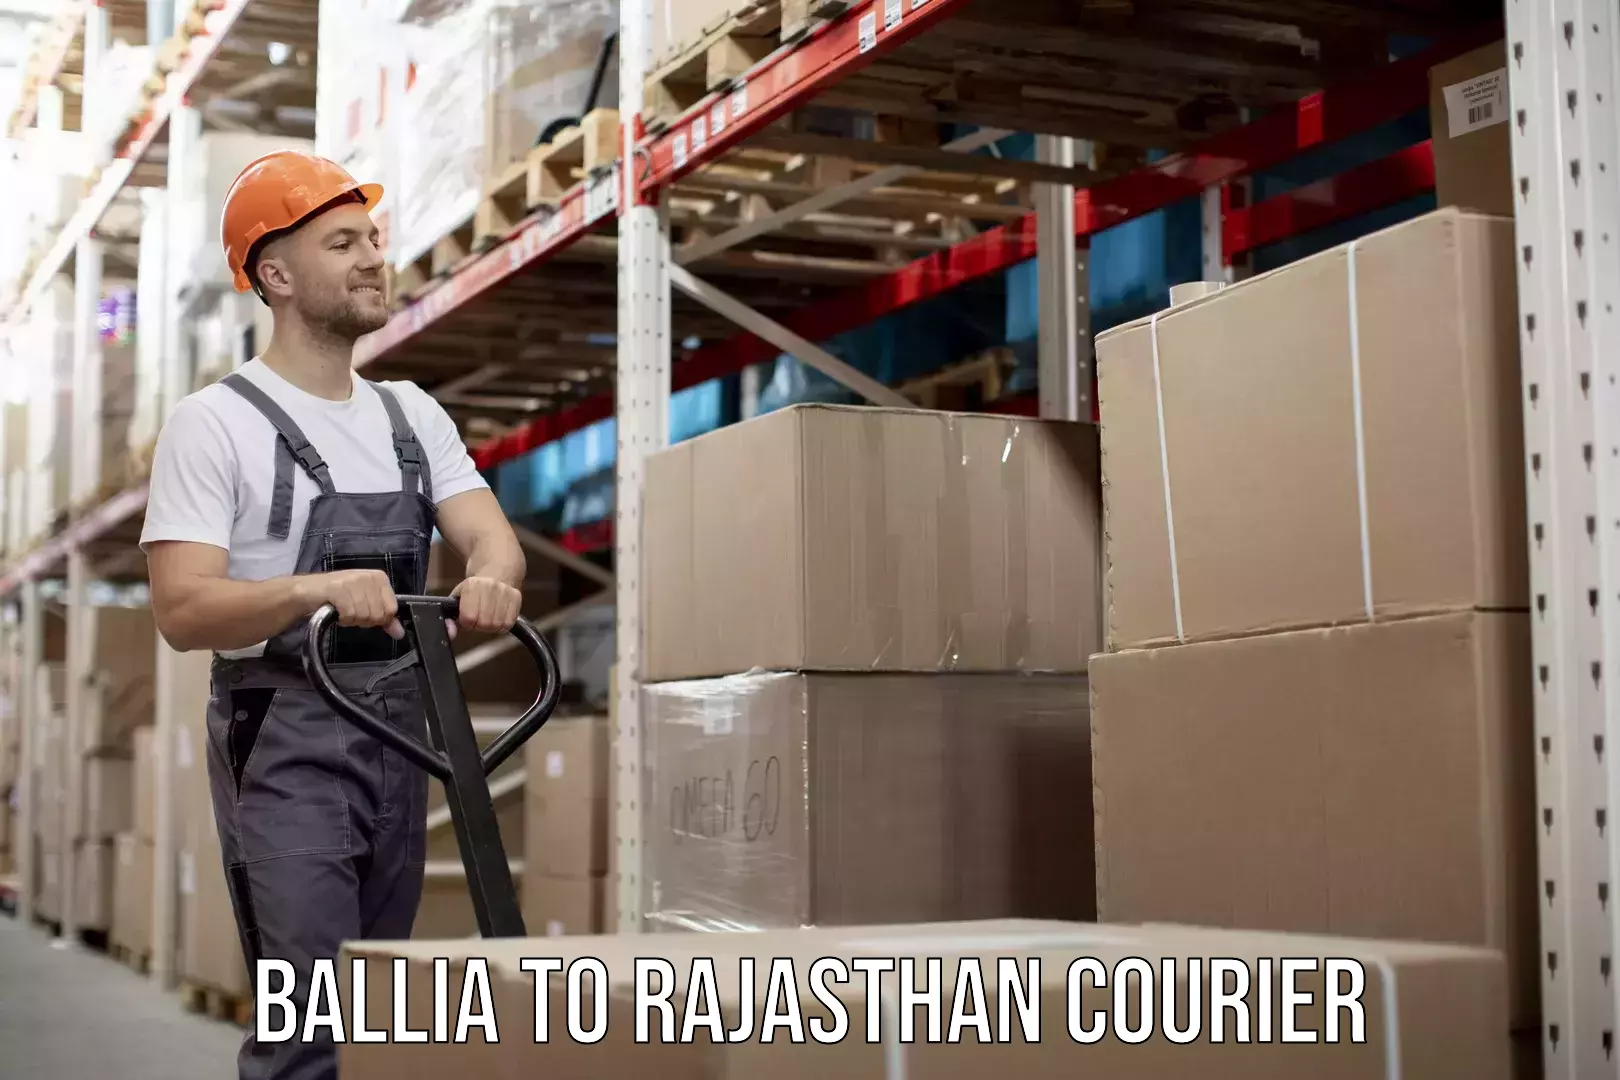 Overnight delivery services Ballia to Rajasthan